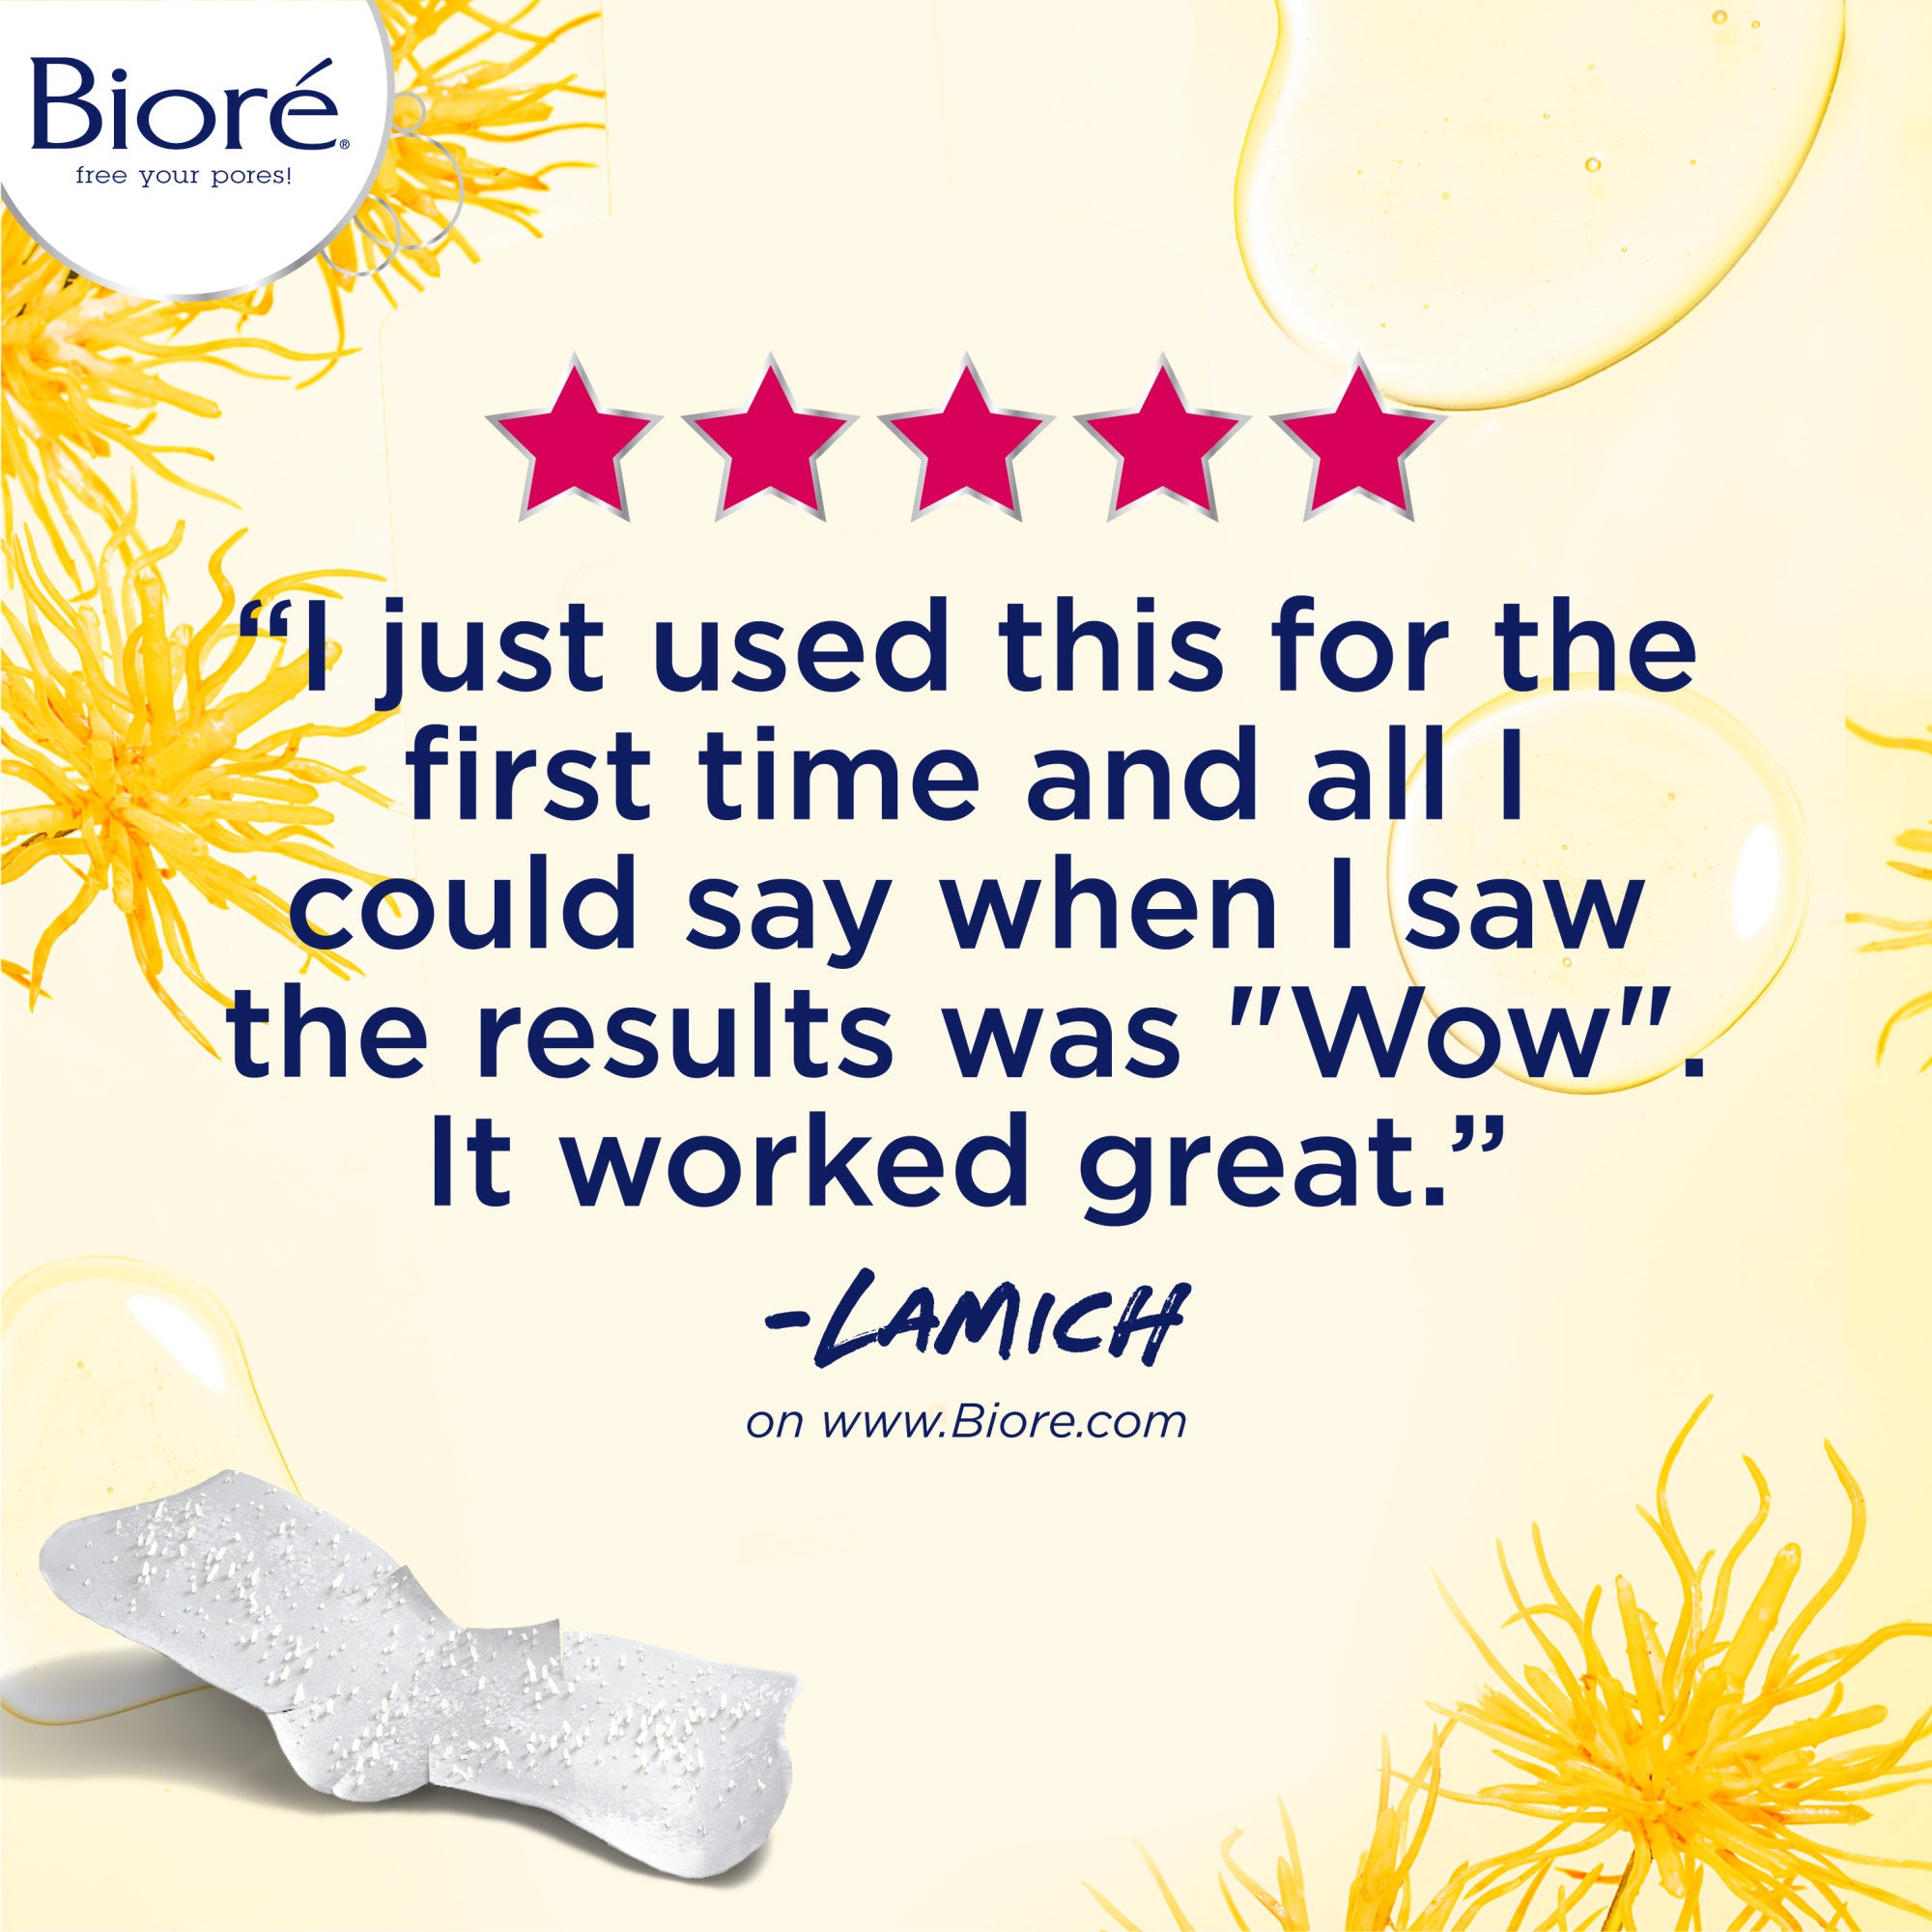 5 Star Review. "I just used this for the first time and all I could say when I saw the results was "Wow". It worked great. Lamich on www.biore.com